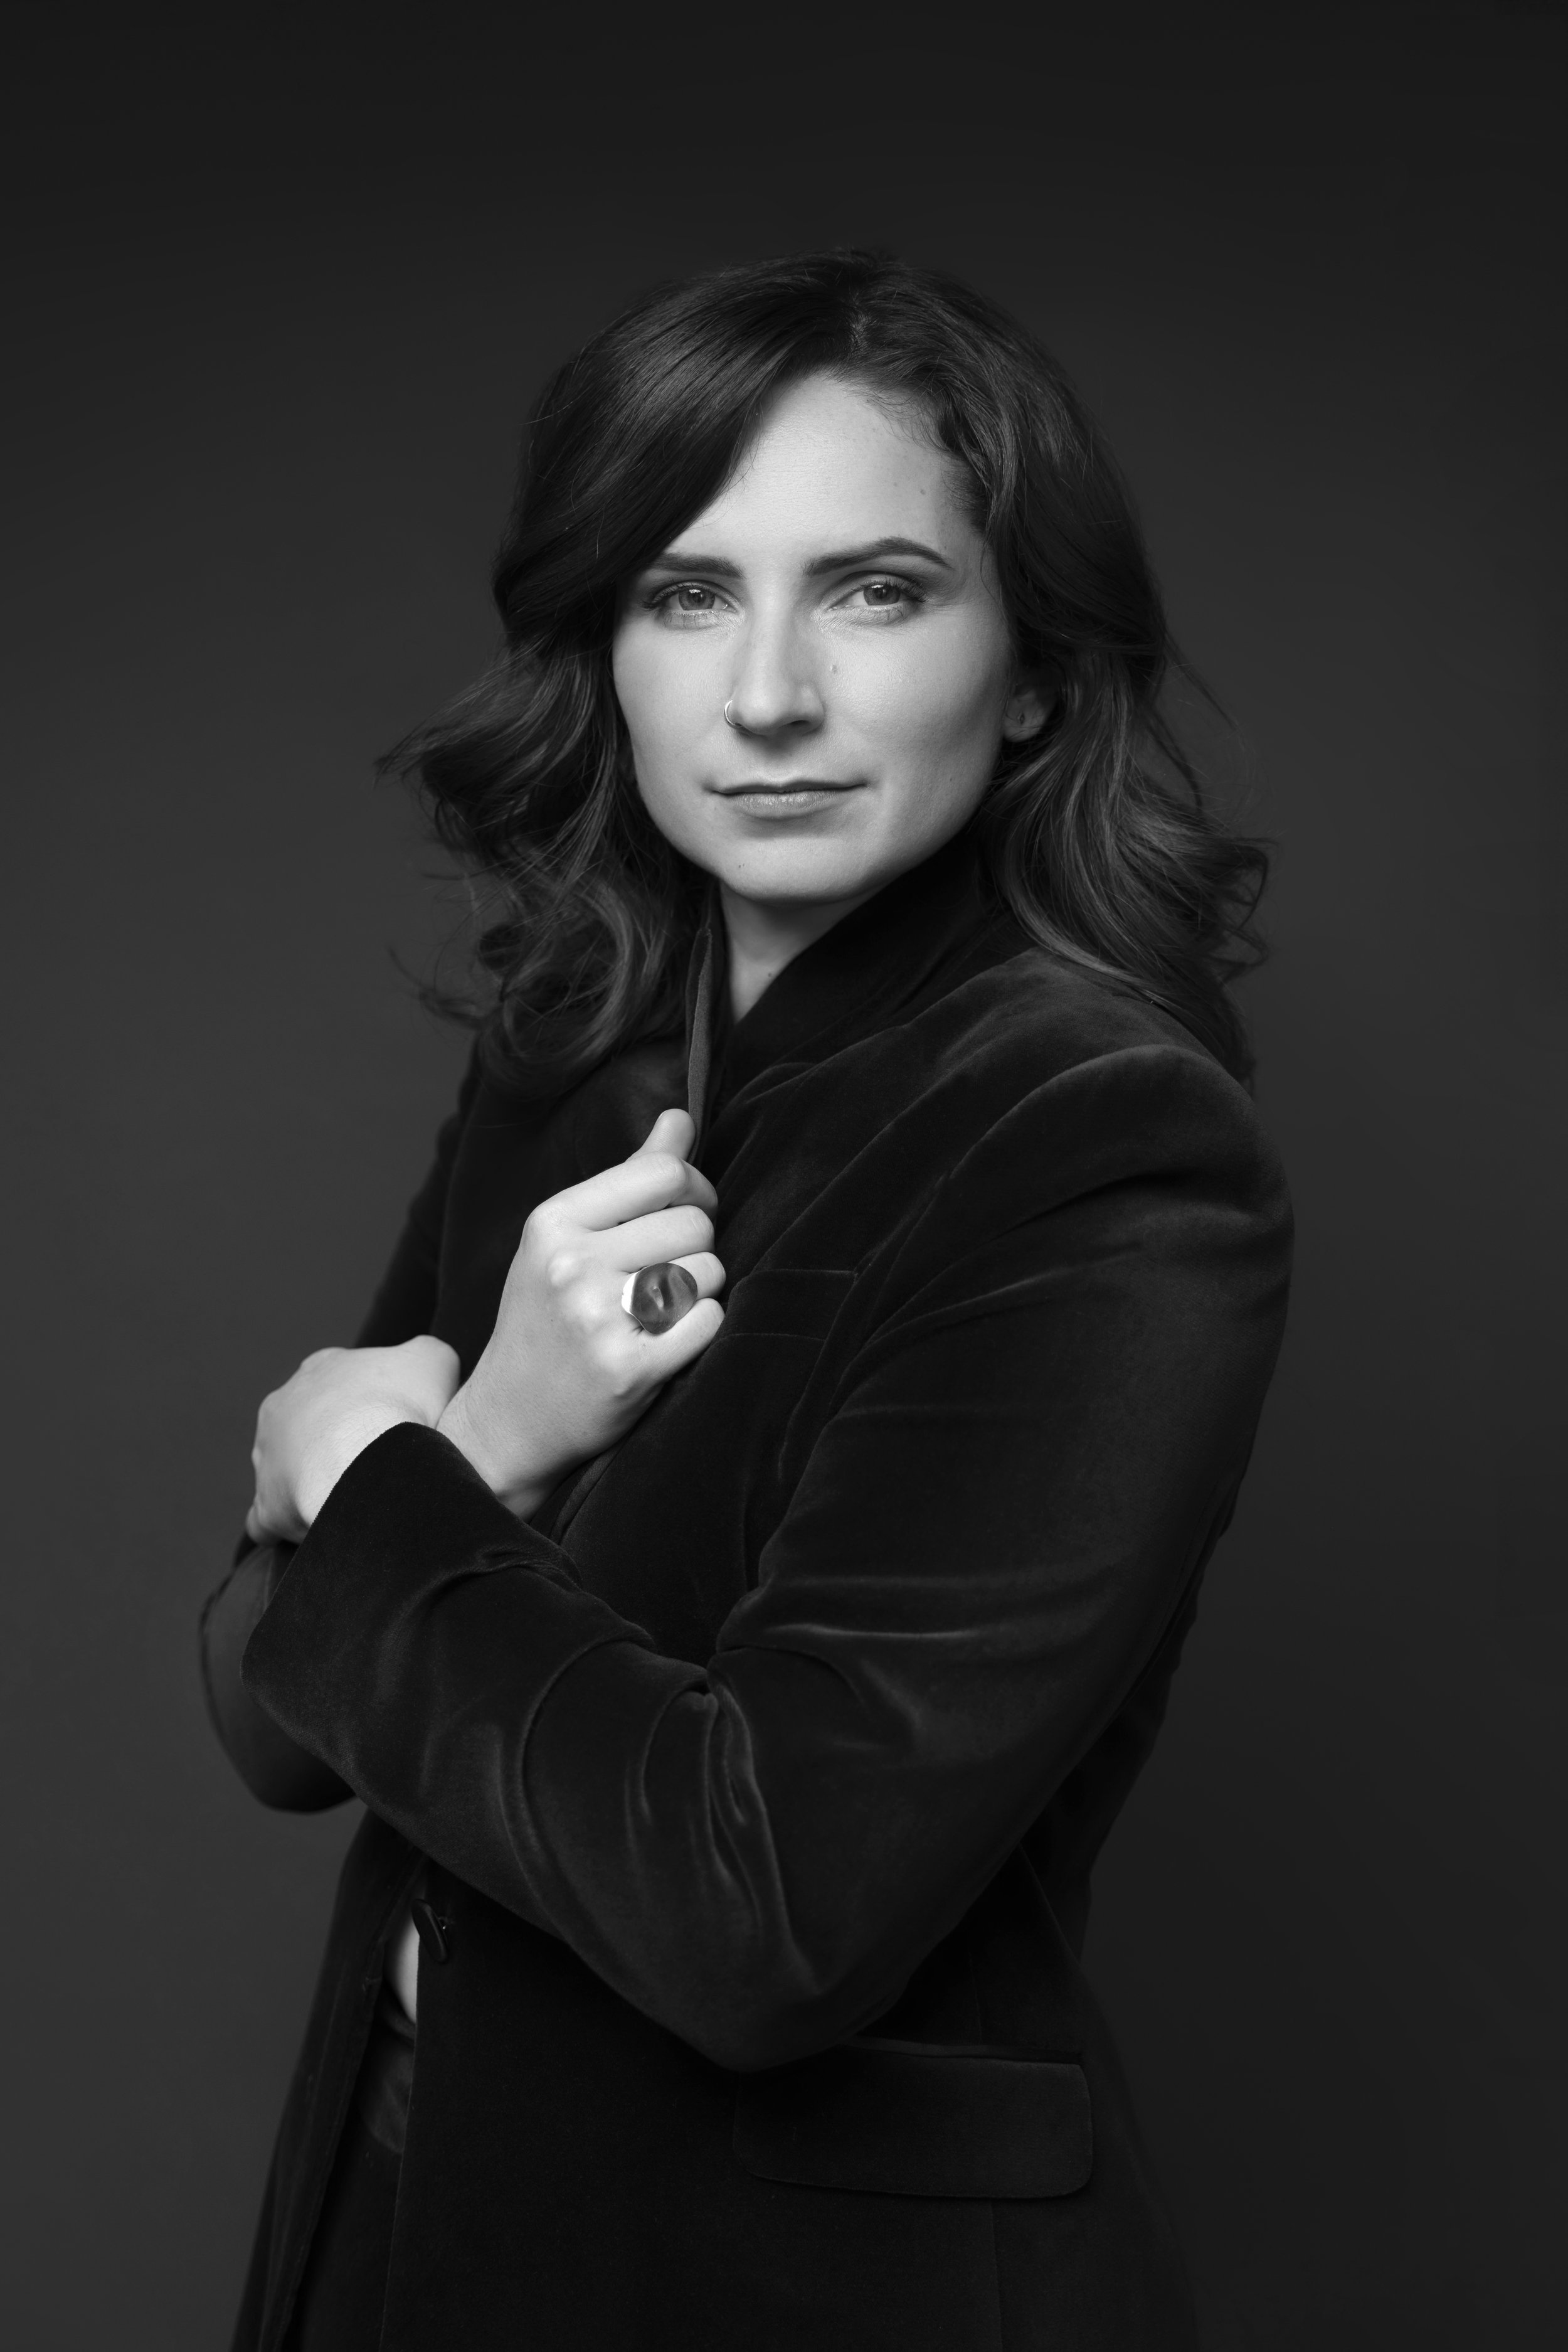  Executive headshot and branding photo of woman in pantsuit by Shannon Beauclair 